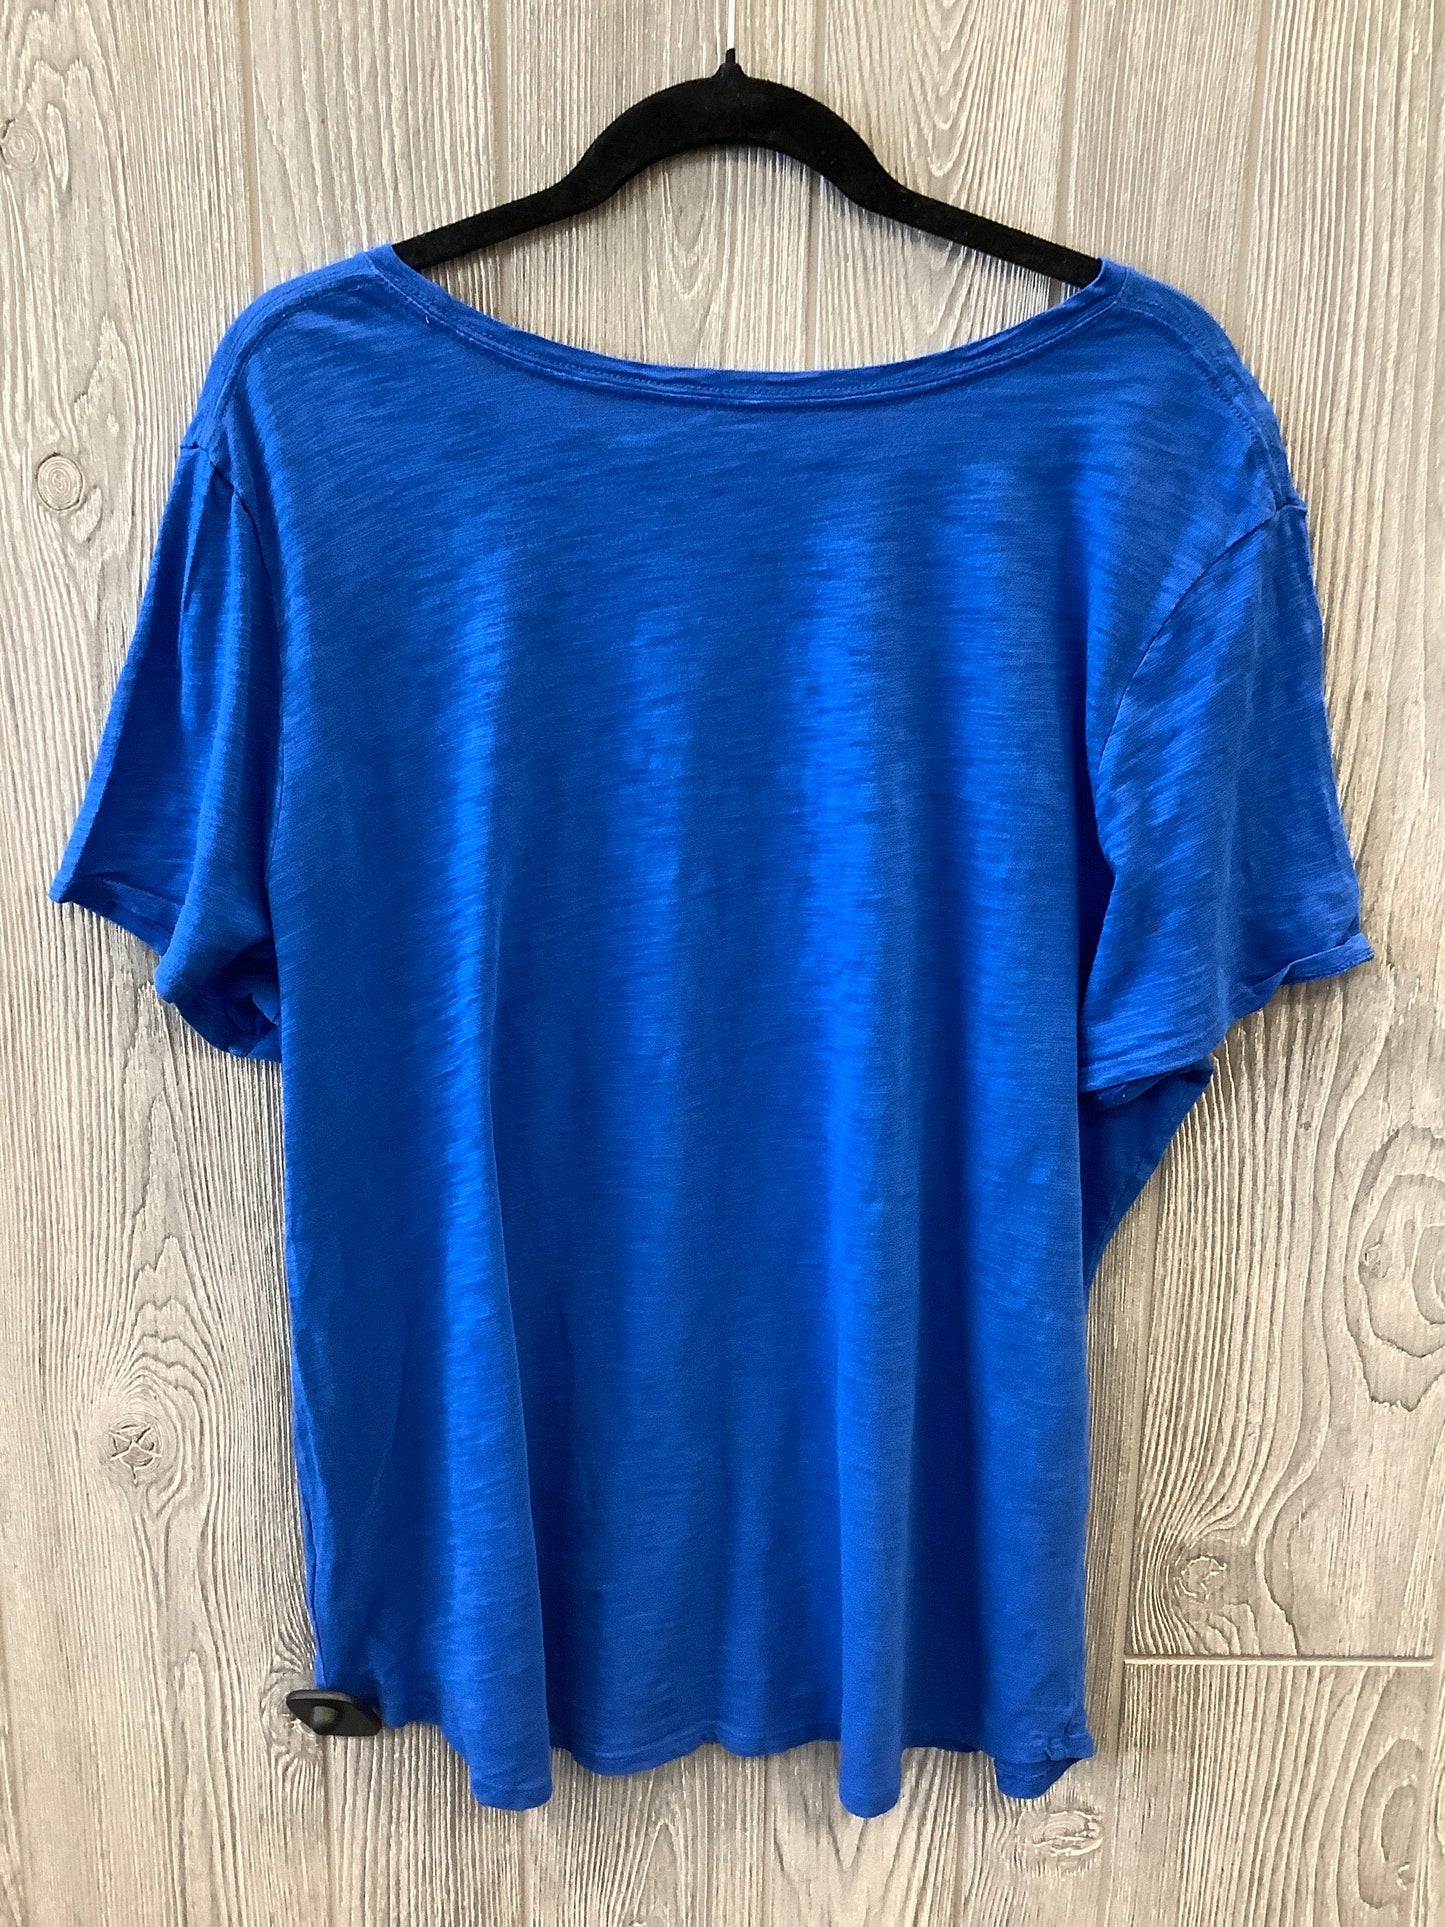 Blue Top Short Sleeve Old Navy, Size Xl